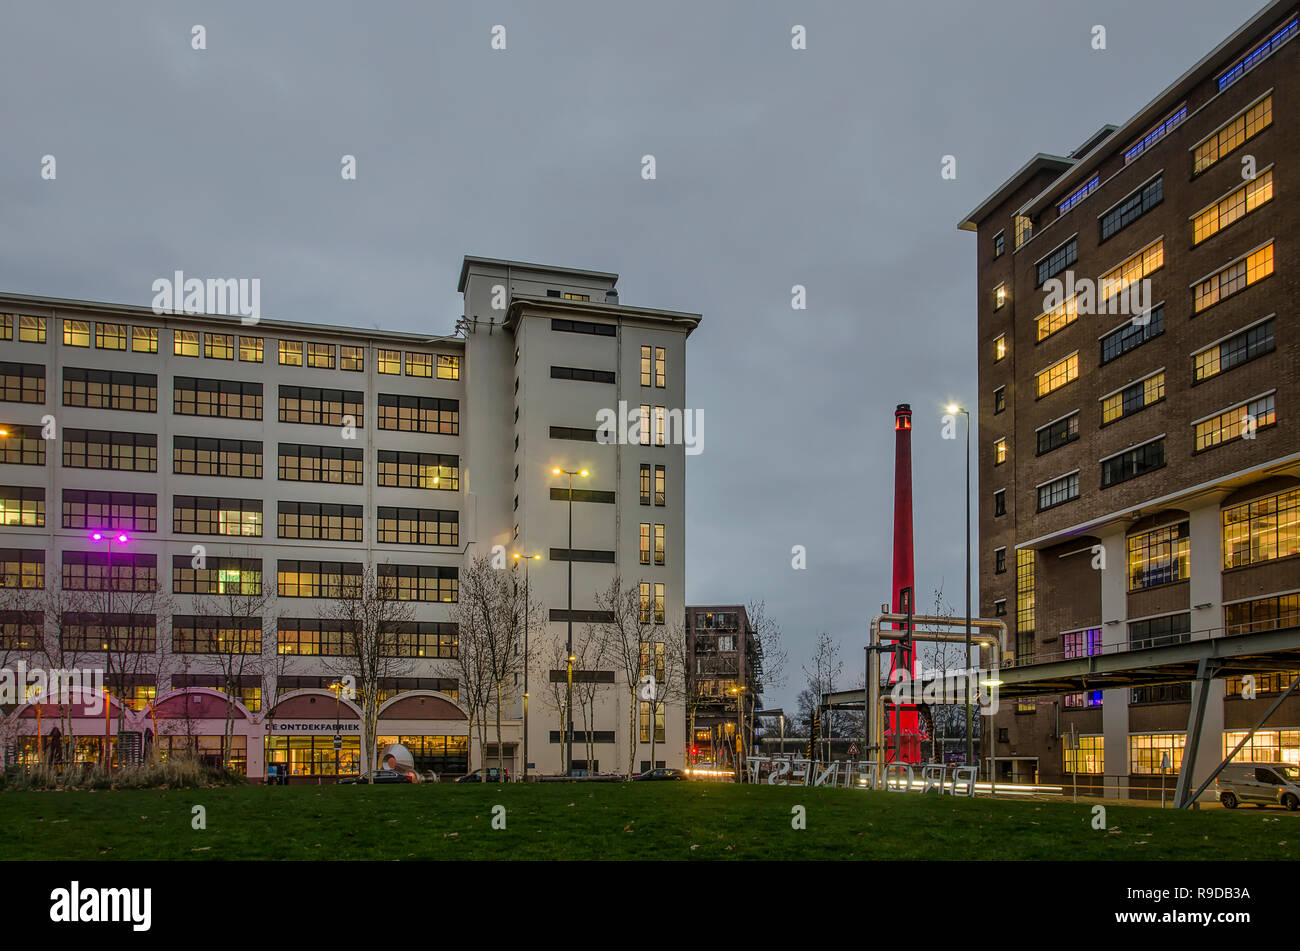 Eindhoven, The Netherlands, December 14, 2018: the Ontdekfabriek (Discovery Factory) and the Glasgebouw (Glass Building) on former Philips research co Stock Photo